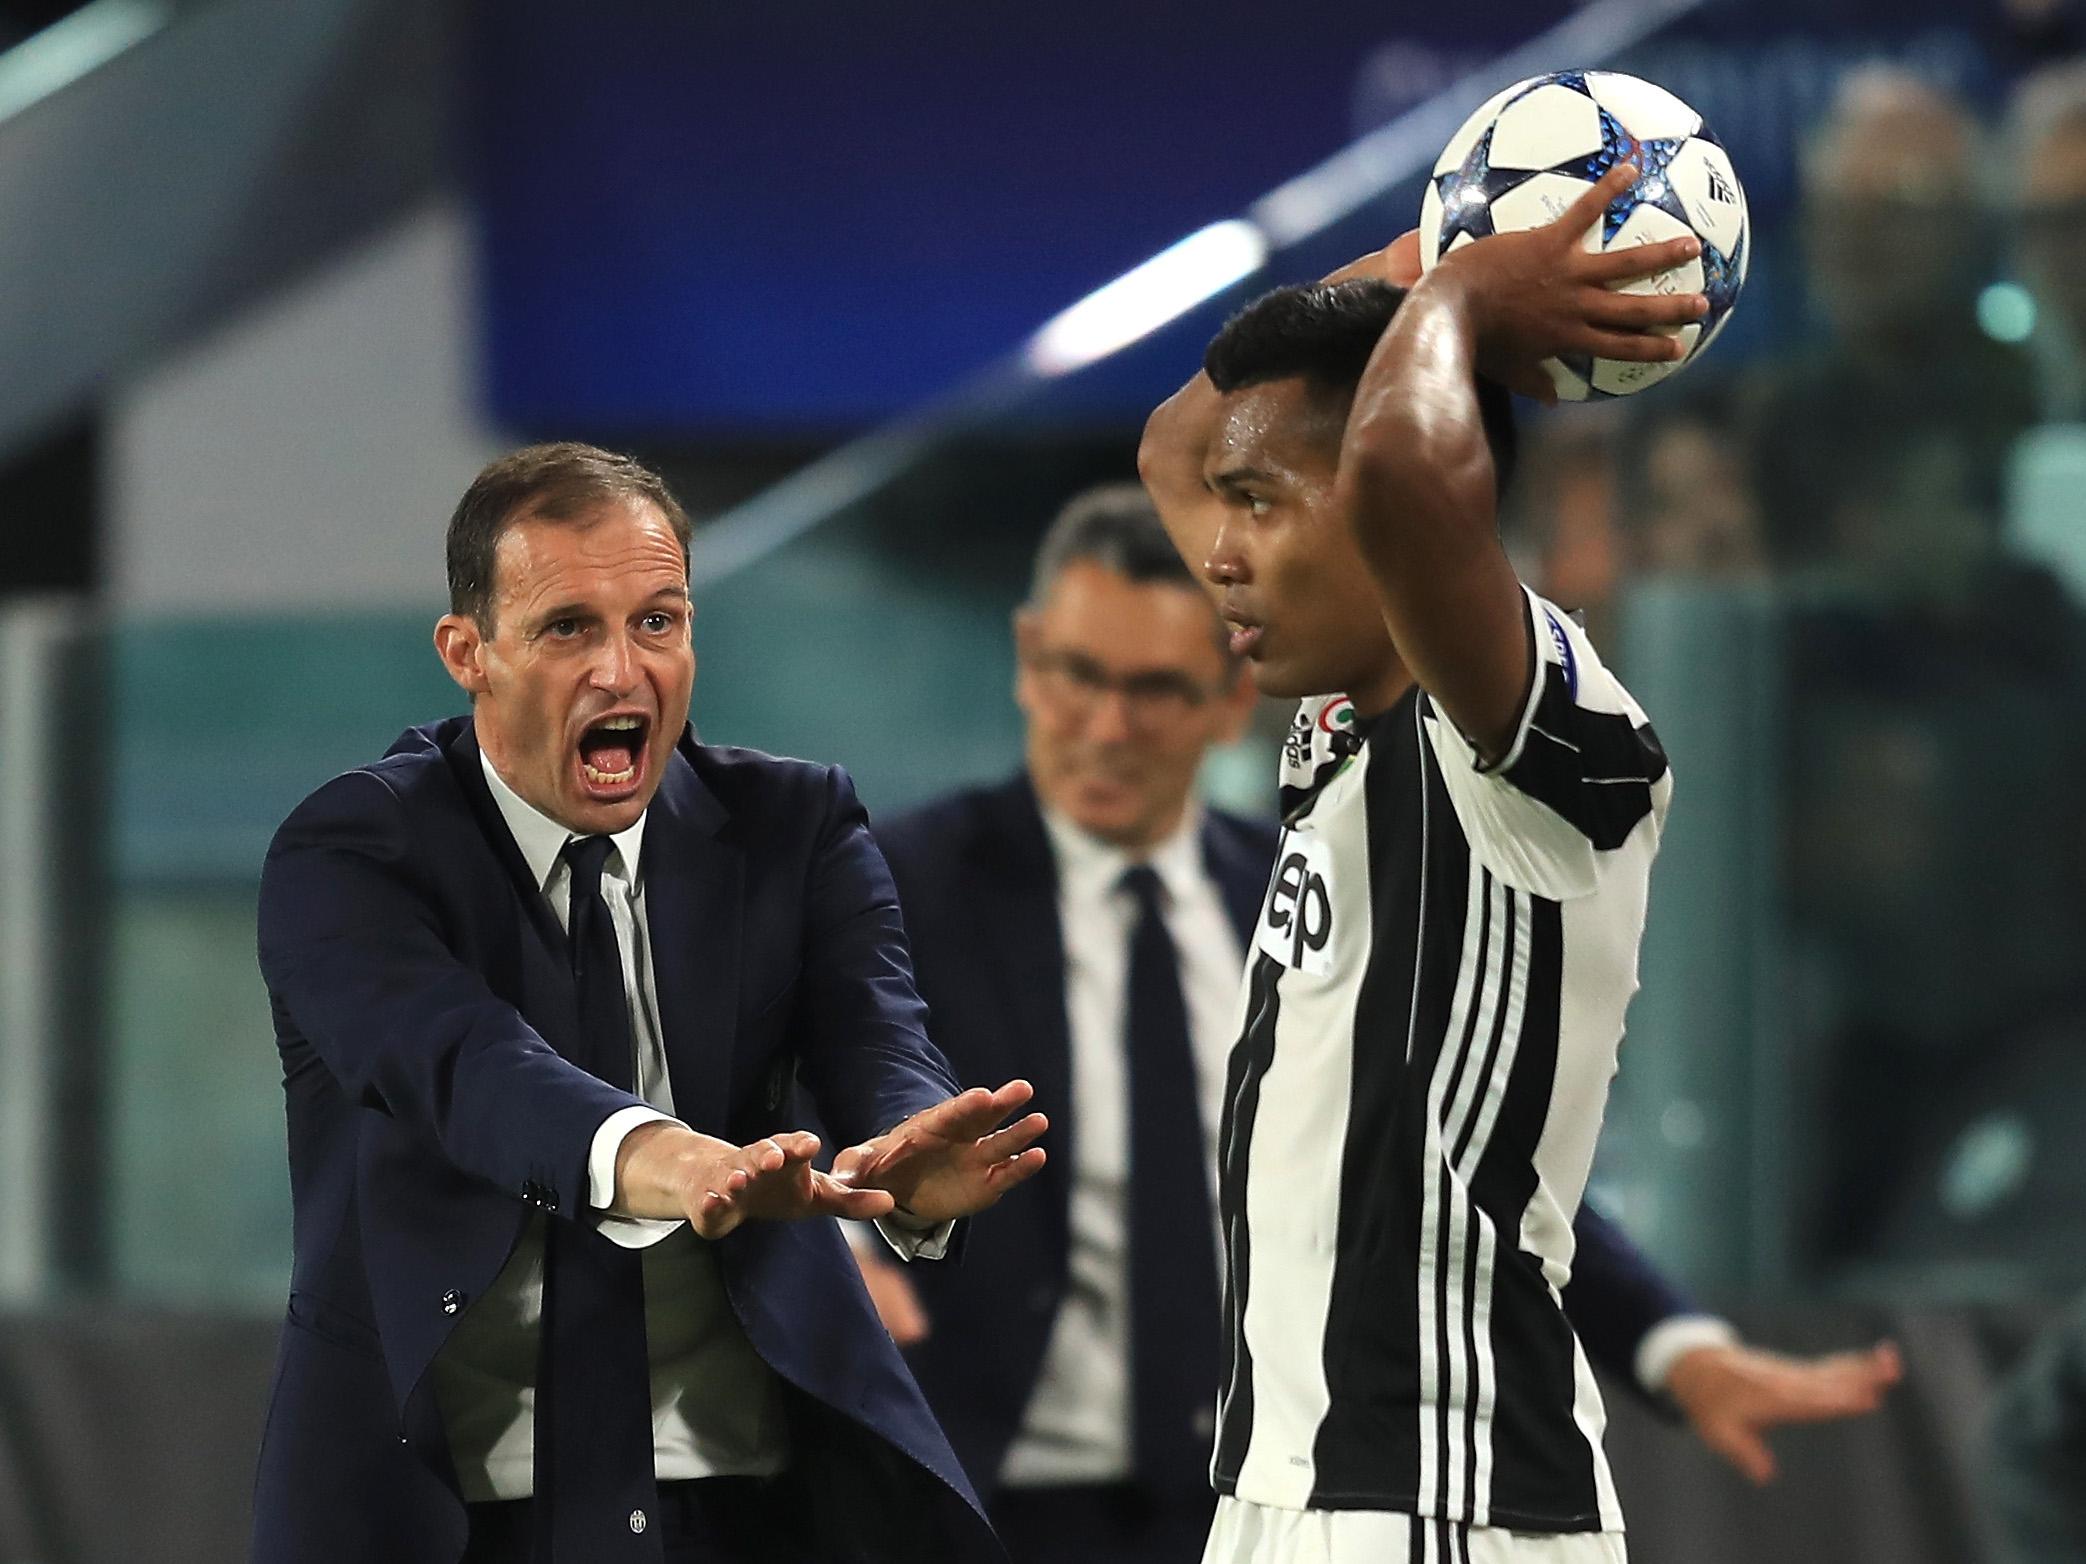 Sandro is going nowhere, according to Juve boss Max Allegri